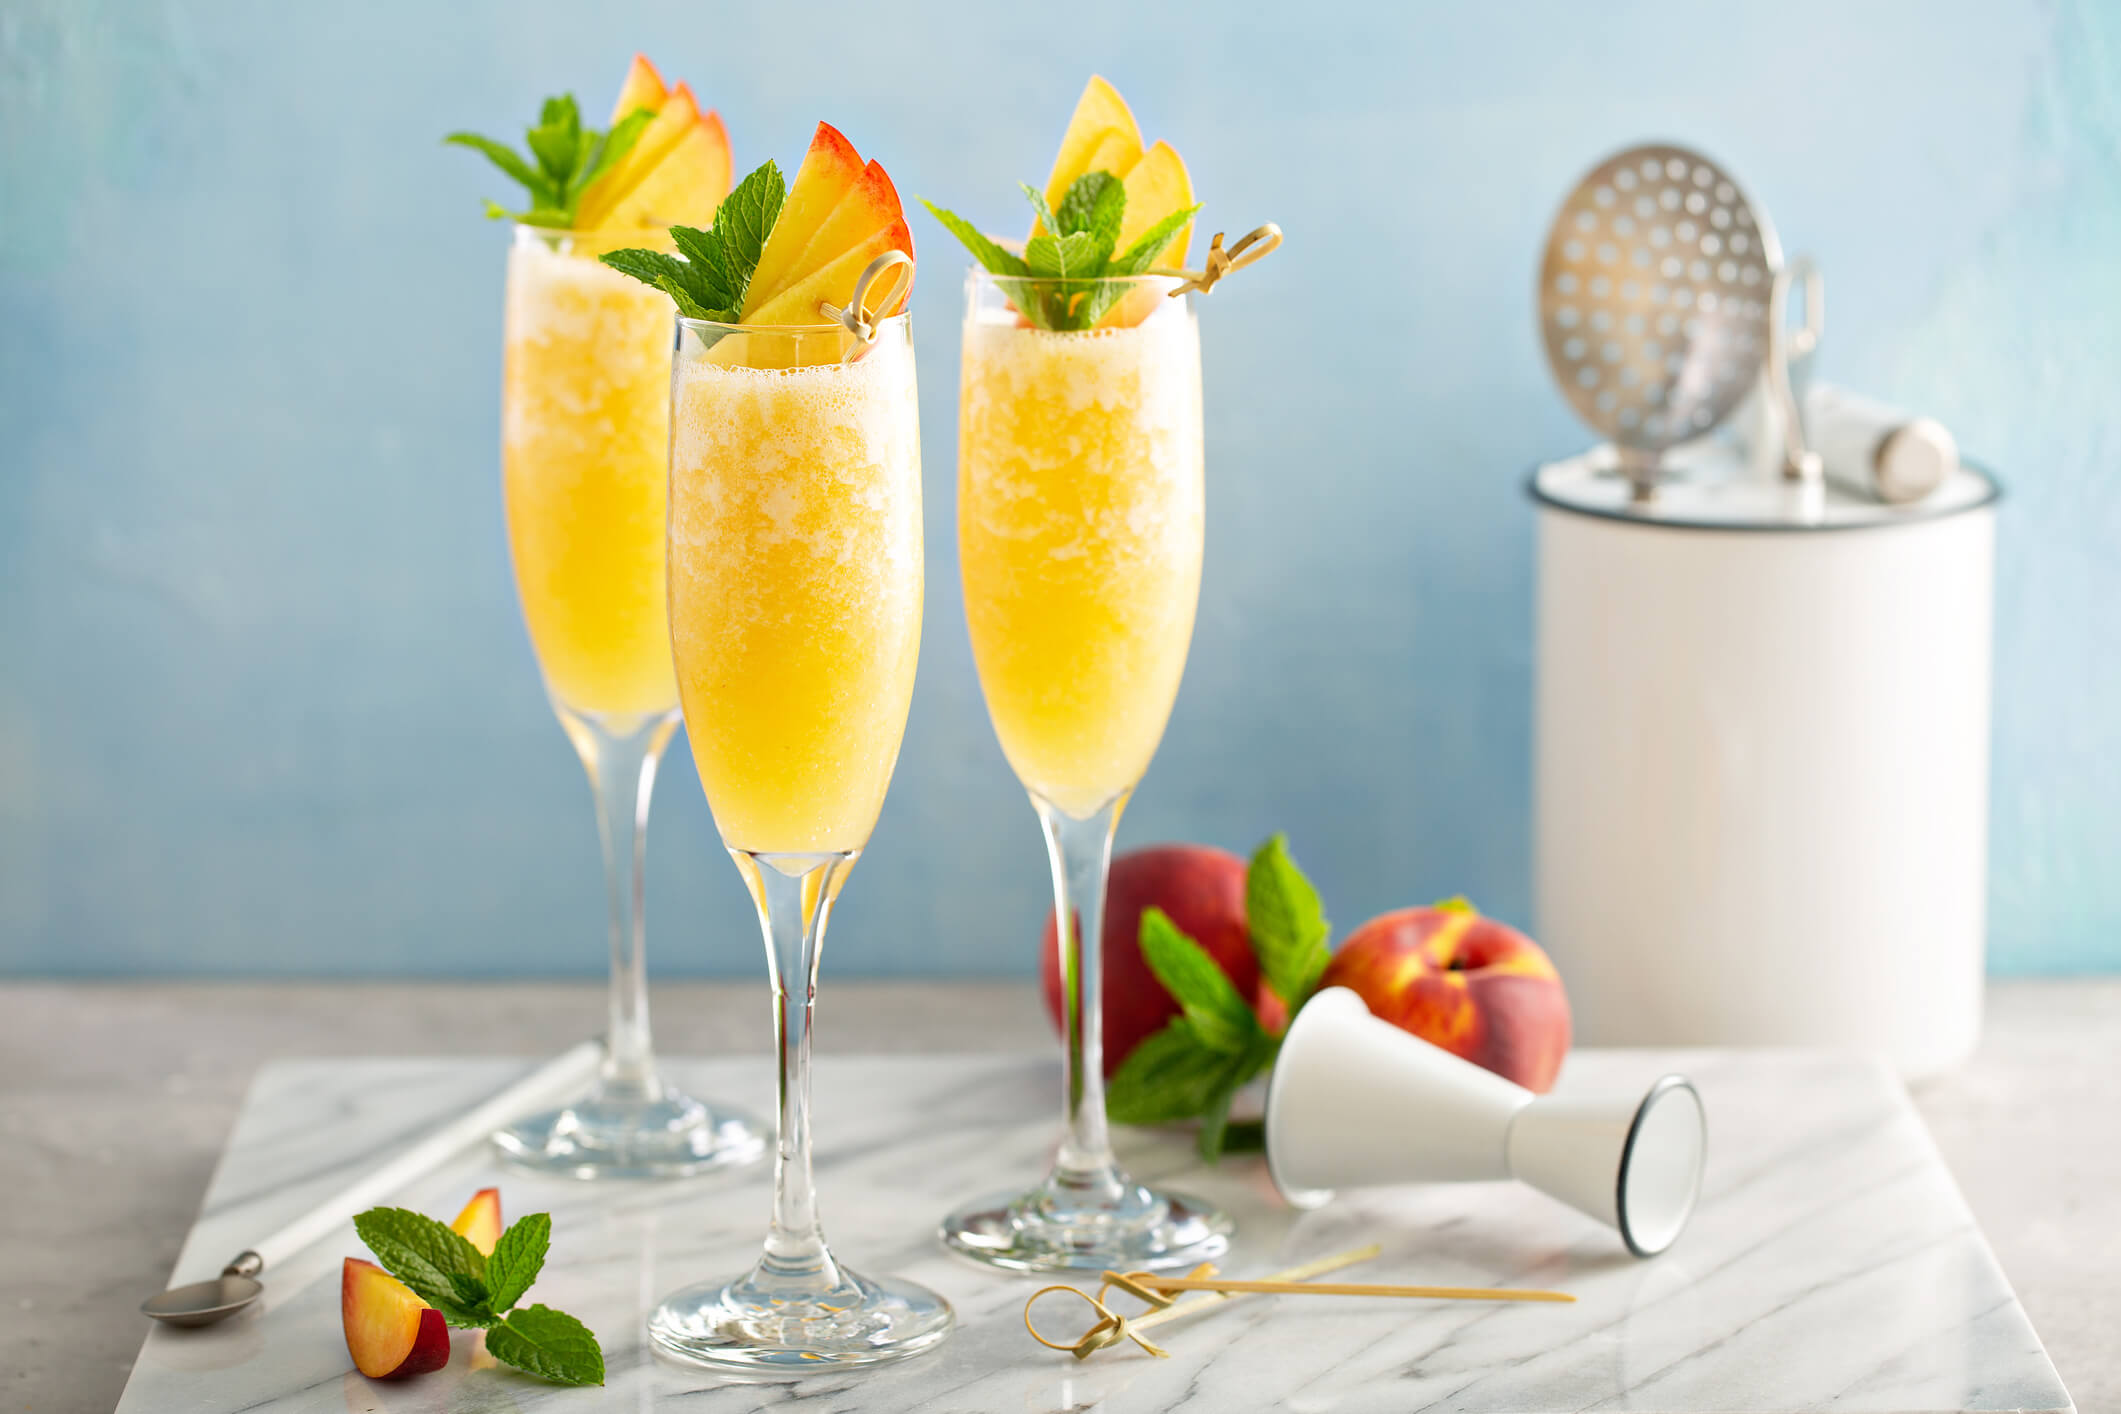 How to Set Up a Mimosa Bar at Your Party